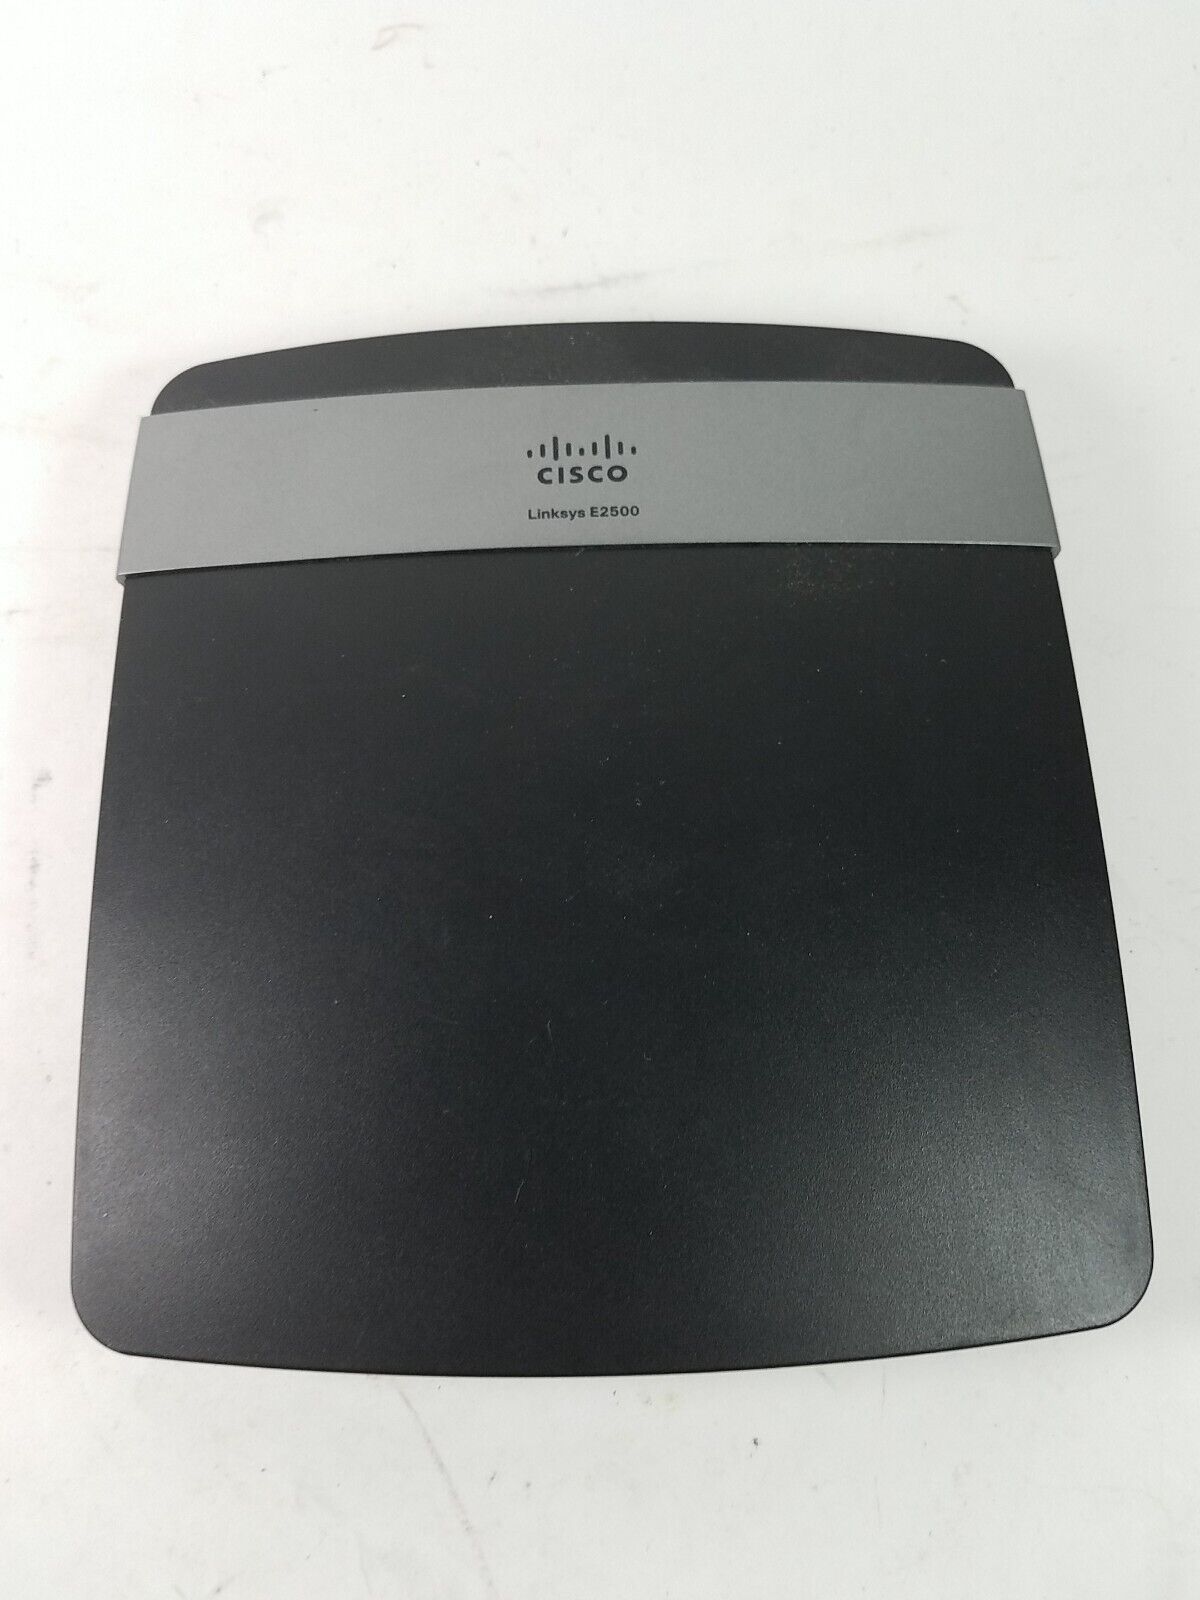 Cisco Linksys E2500 Dual-Band Wireless-N Router